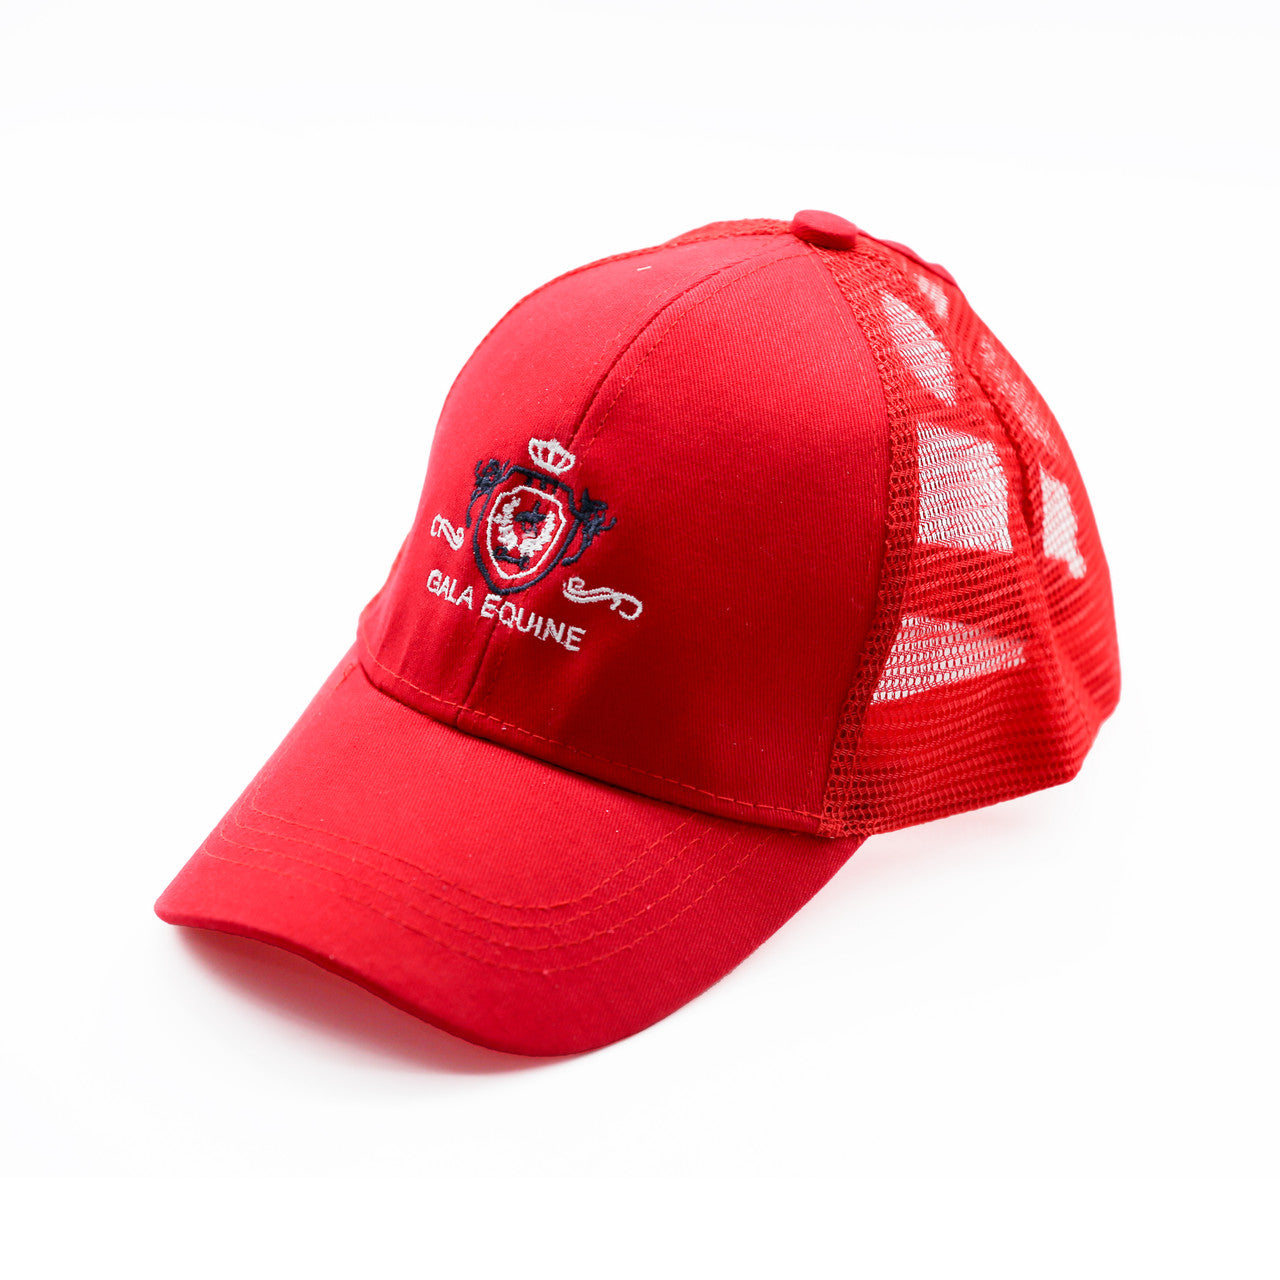 Cap - Red Mesh with Gold Shield